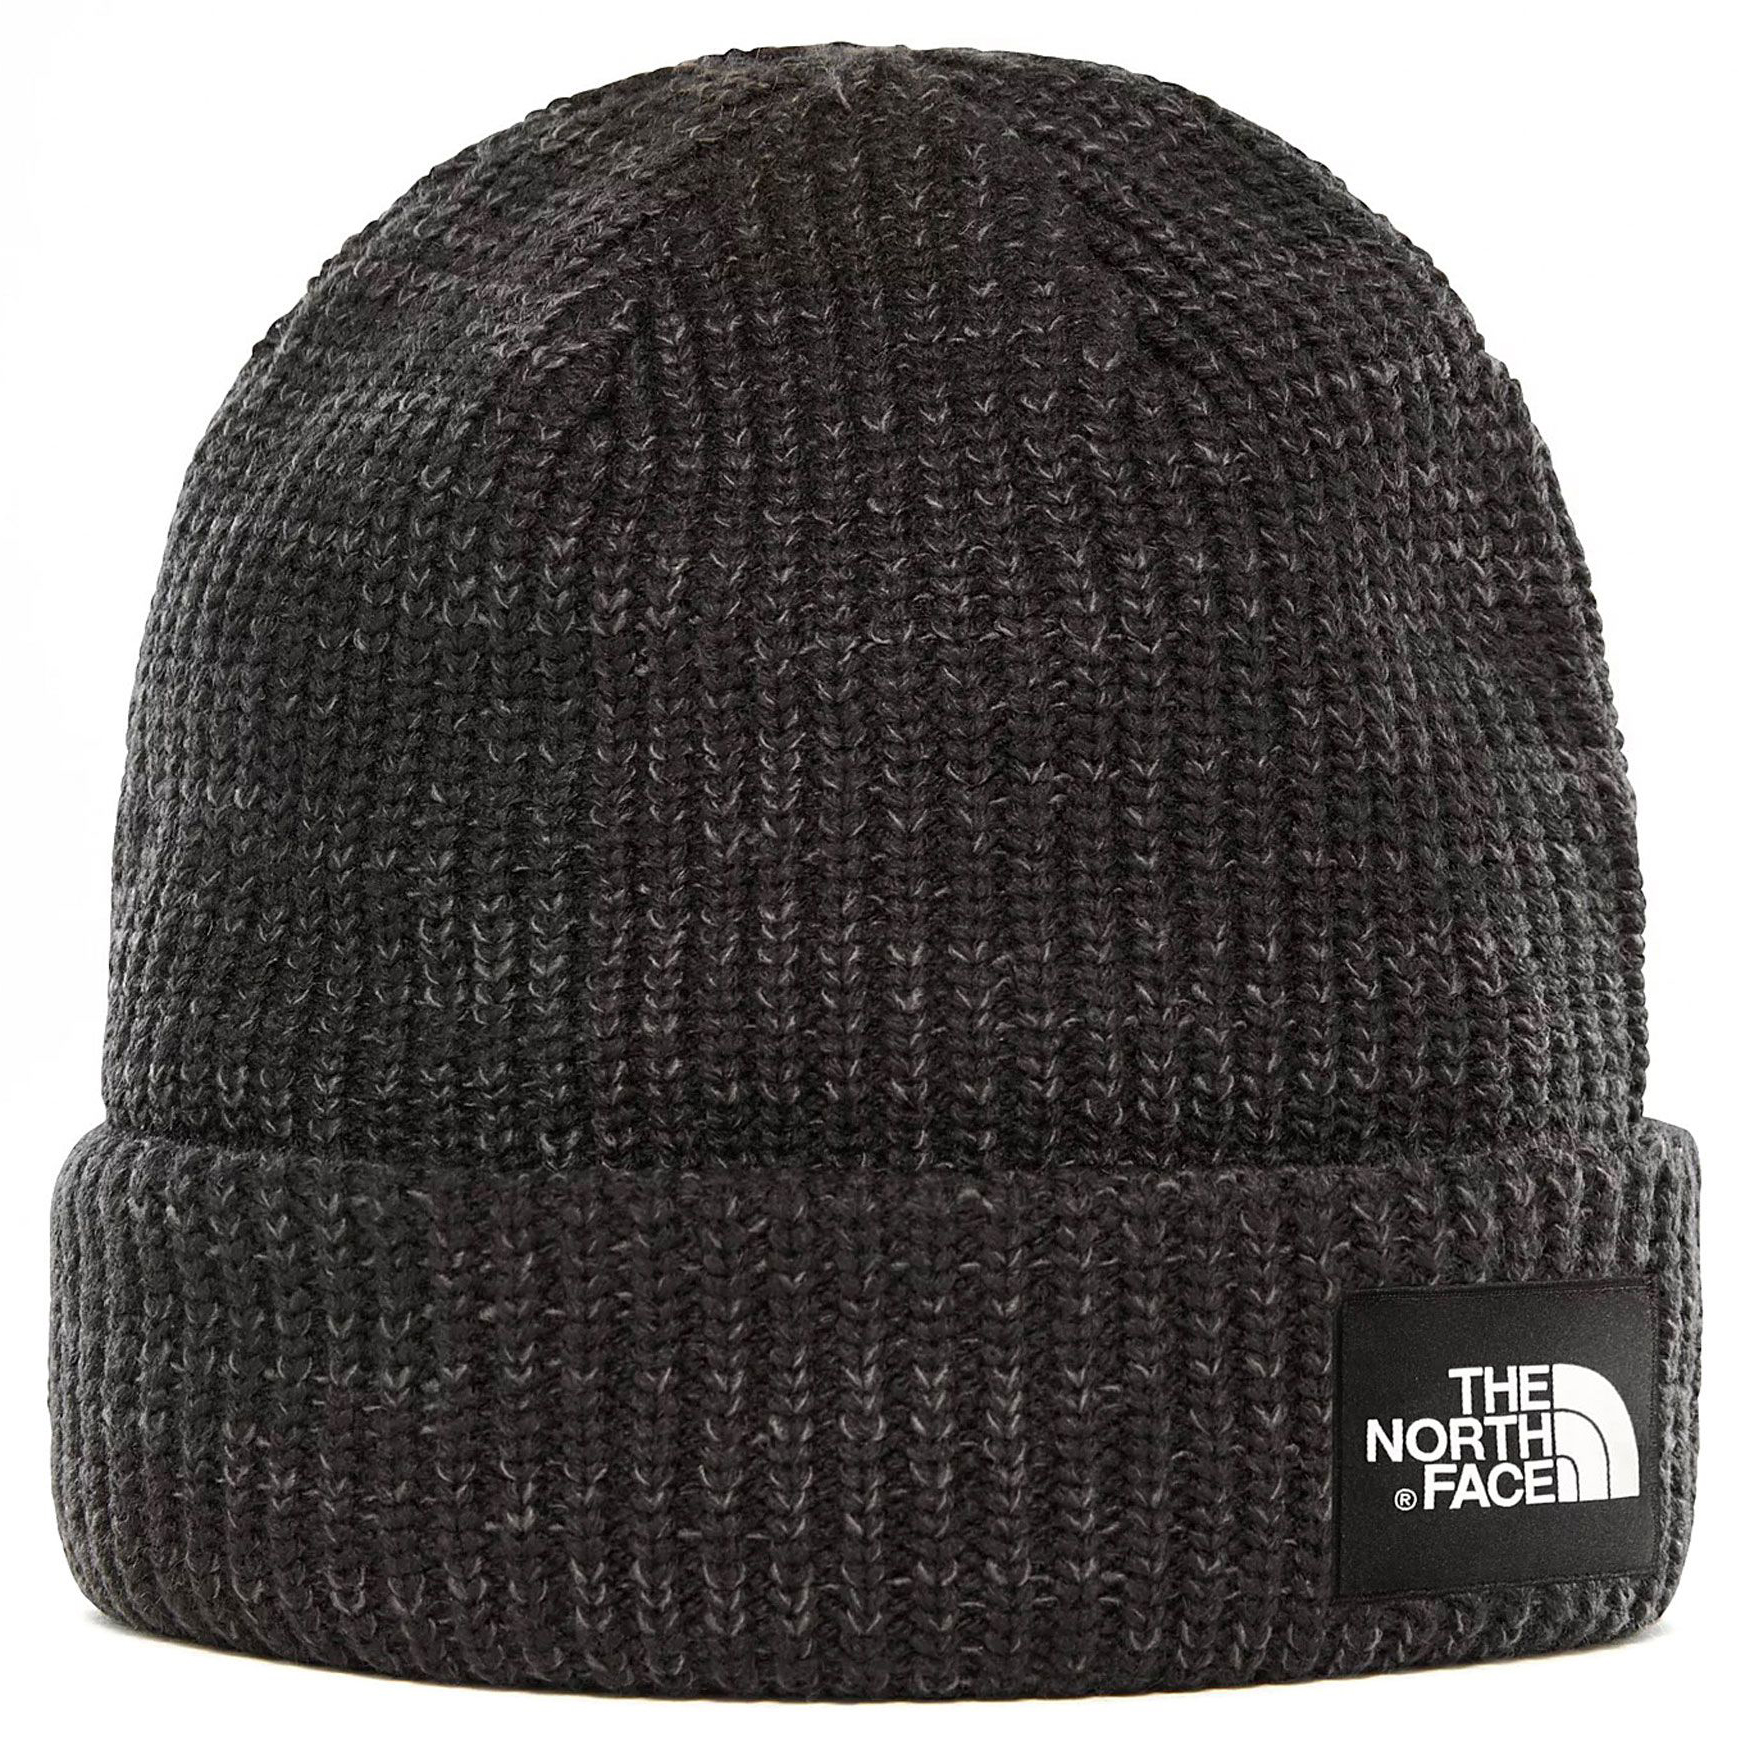 Afbeelding van The North Face Salty dog beanie